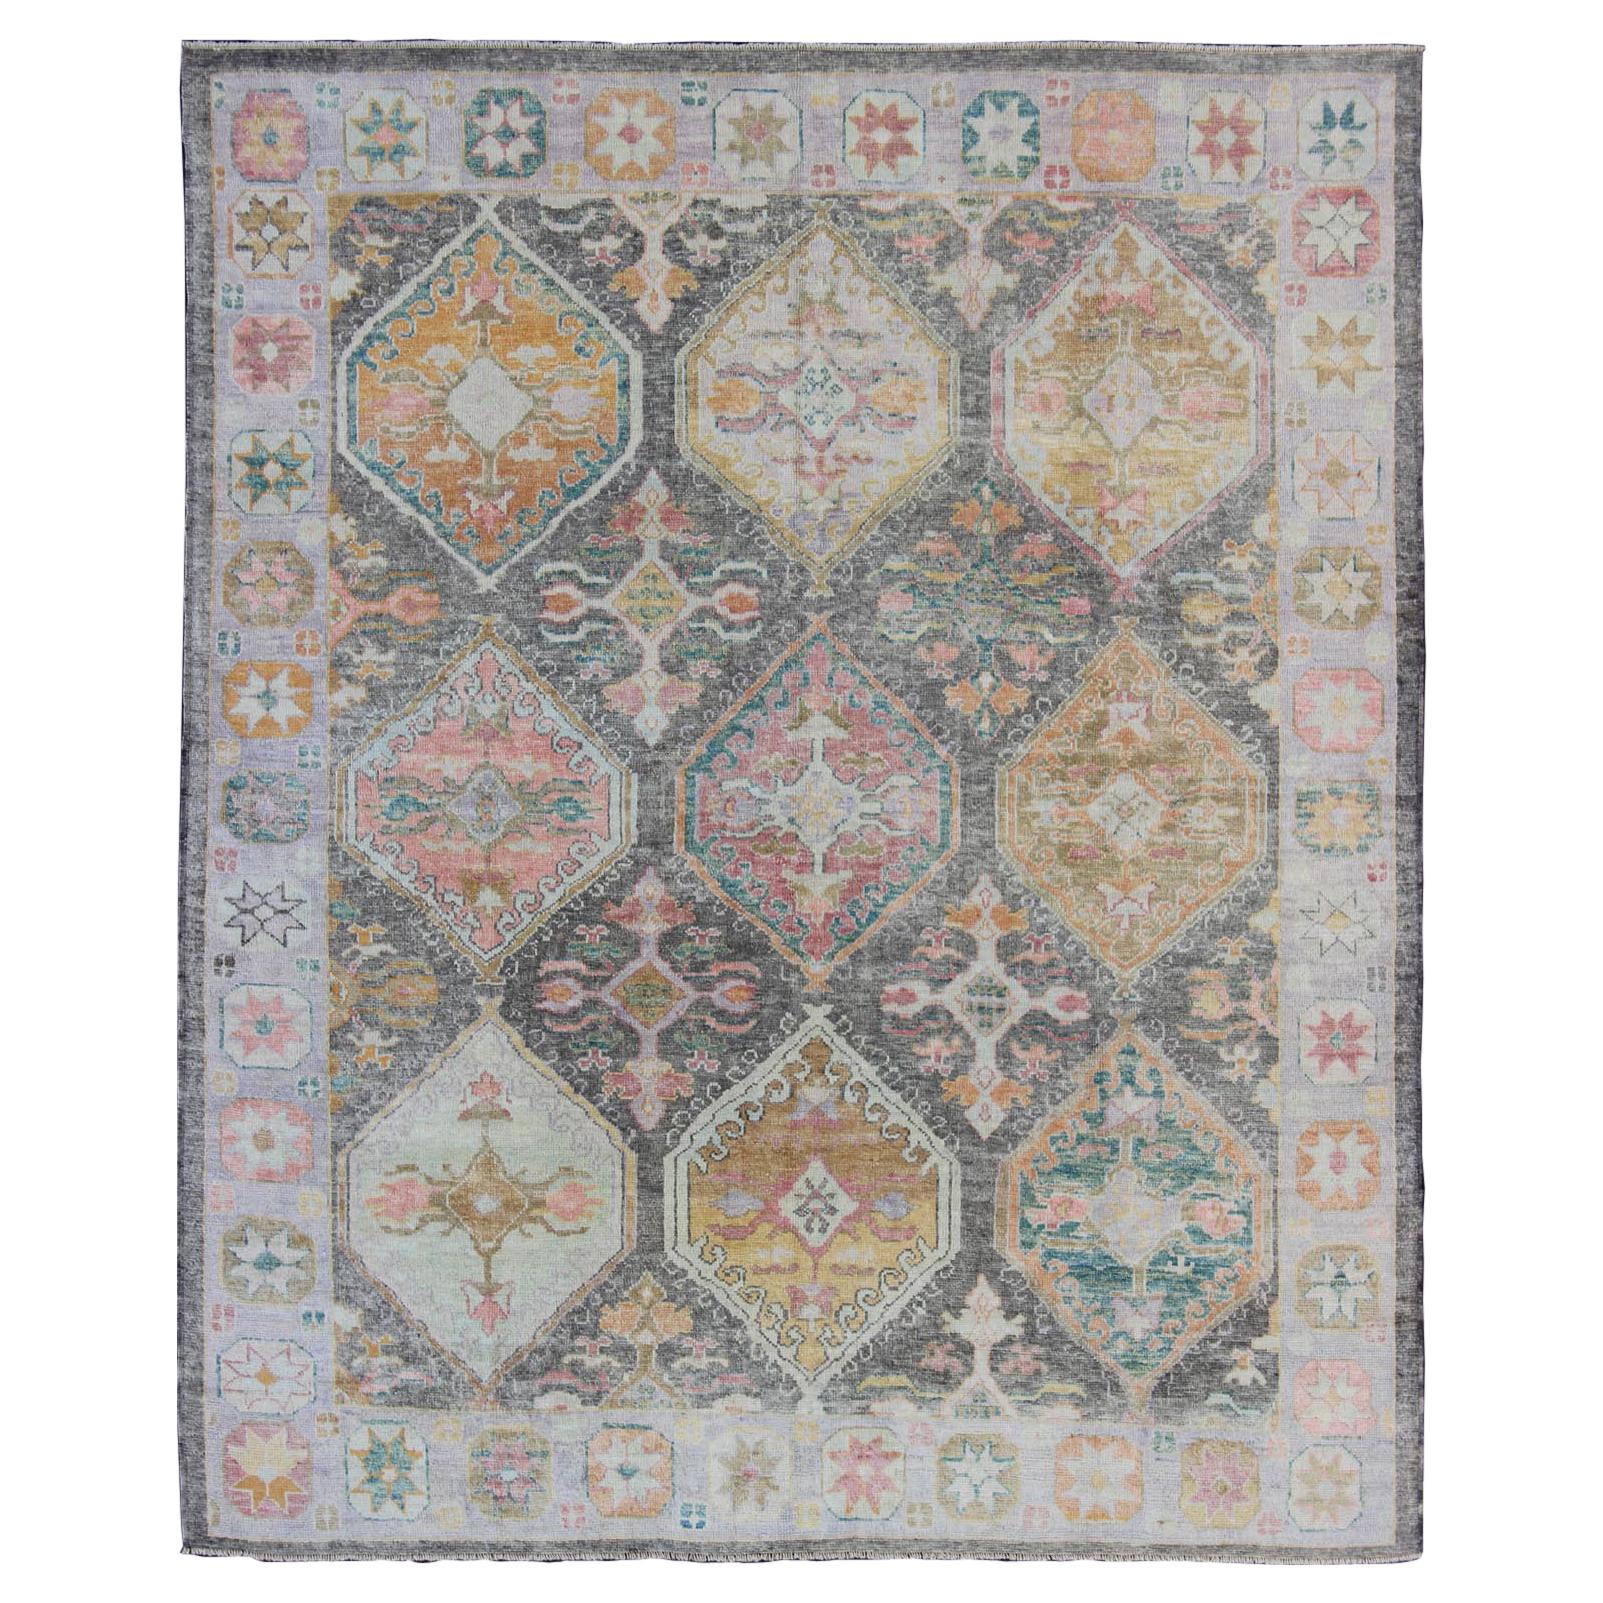 Tribal Design Turkish Oushak Rug with Large Medallions in Gray and Multi Colors